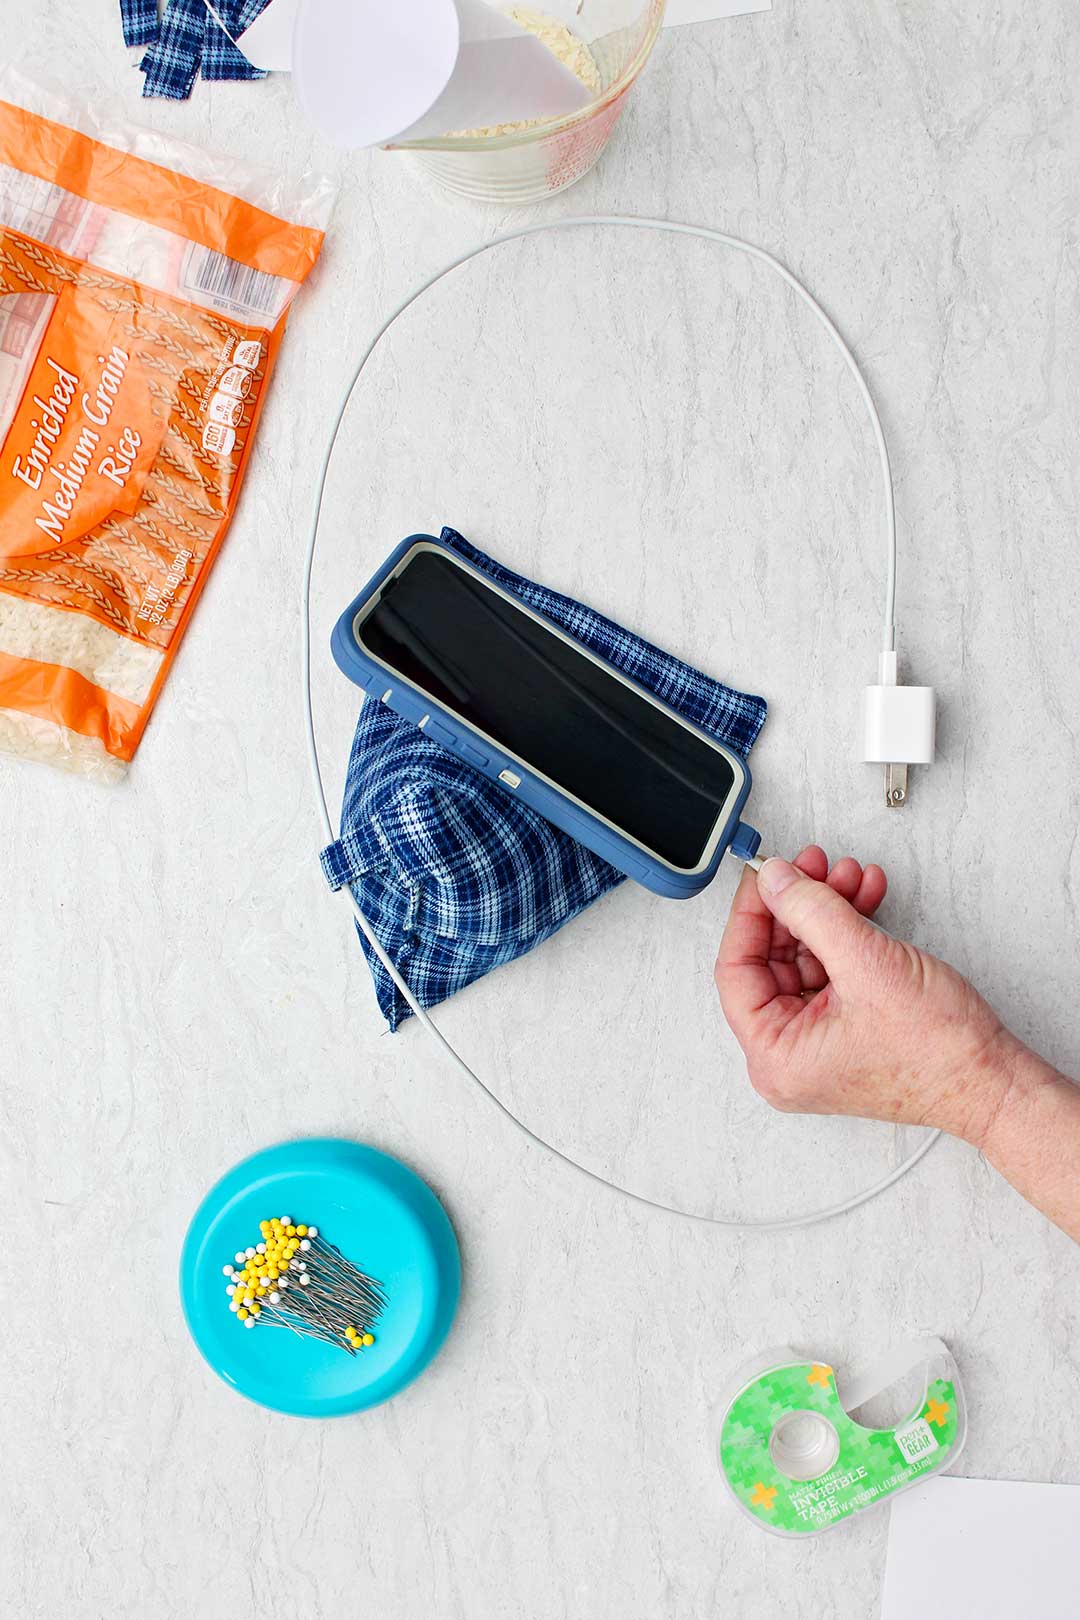 Hand plugging in cell phone charger into cell phone which is resting on completed Cell Phone Holder Pillow with other supplies near by.